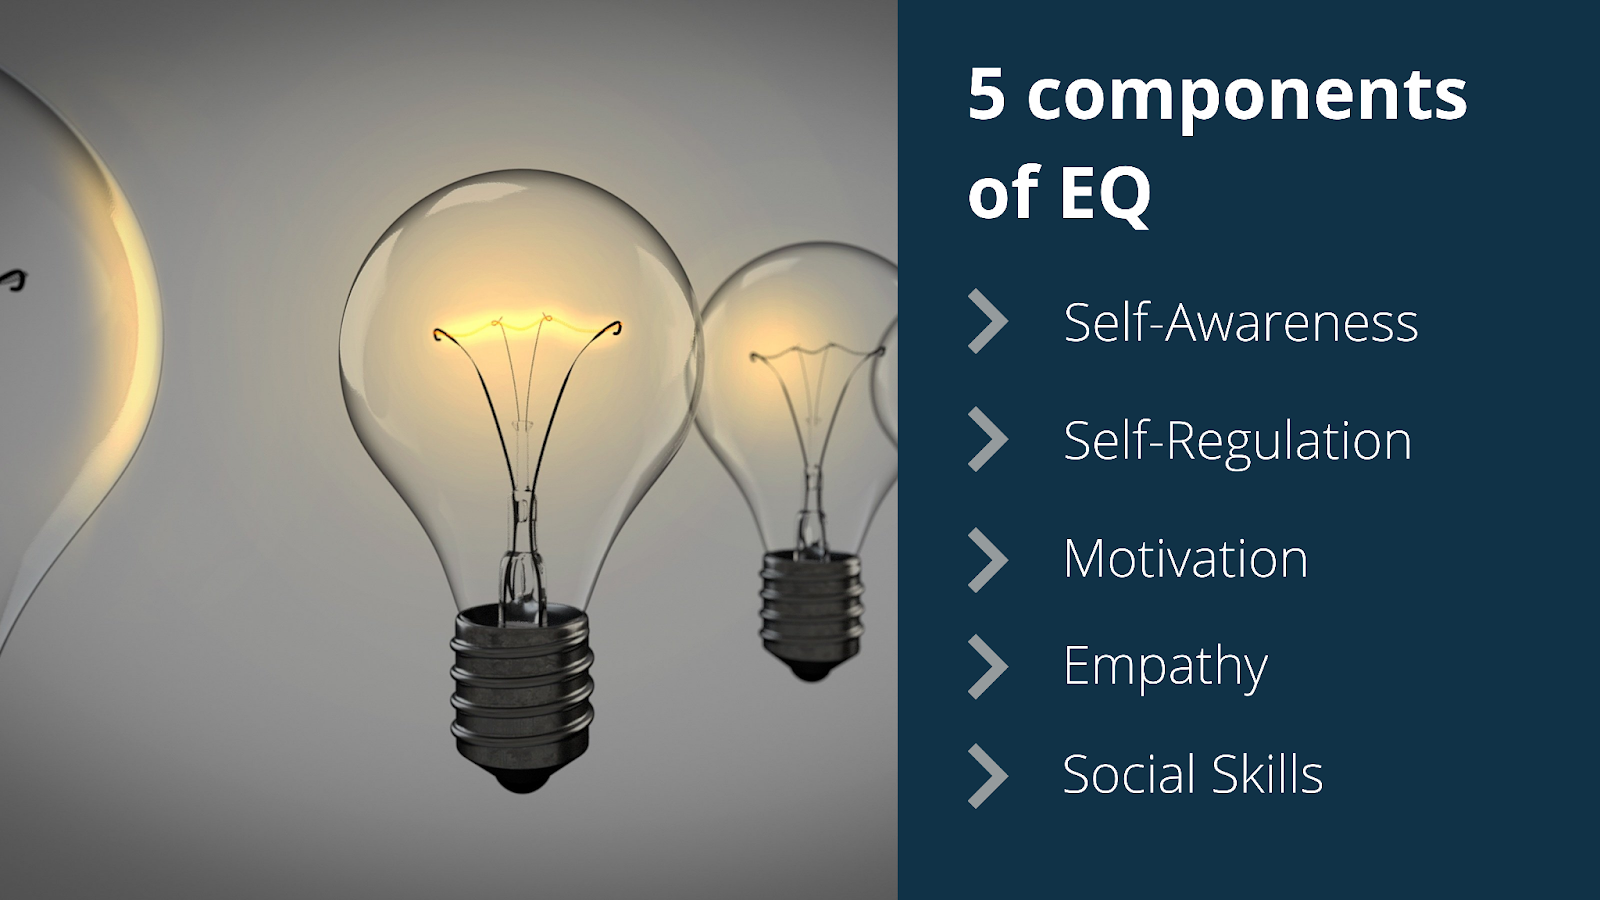 5 Components of Emotional Intelligence in the Workplace